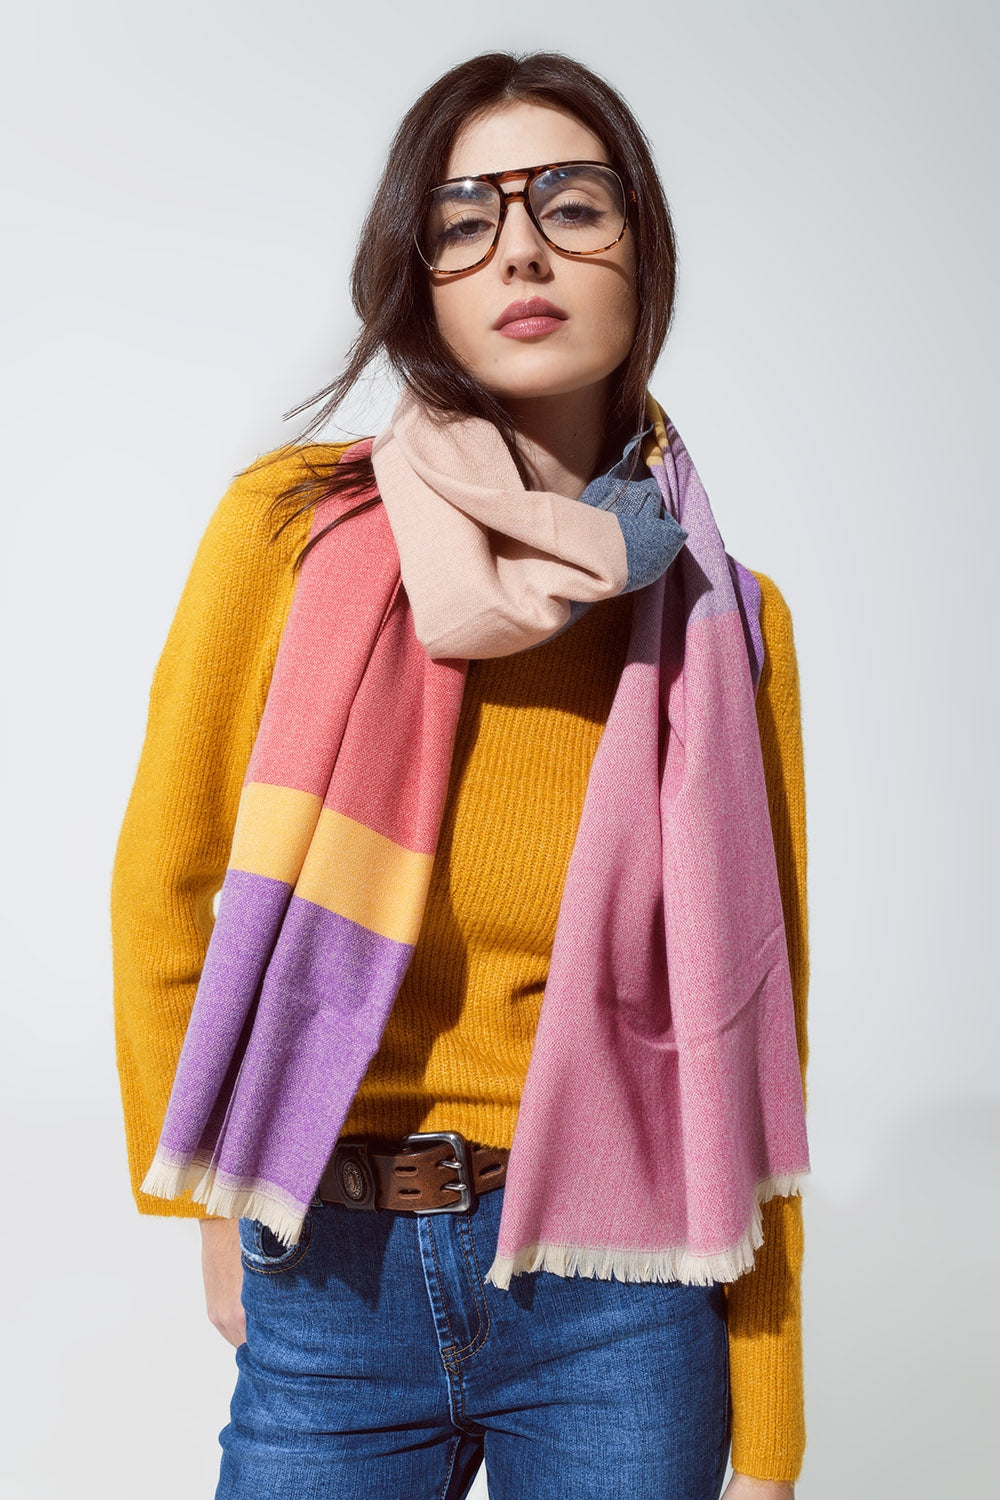 Q2 Thin Long Scarf In Multicolor Warm Colors